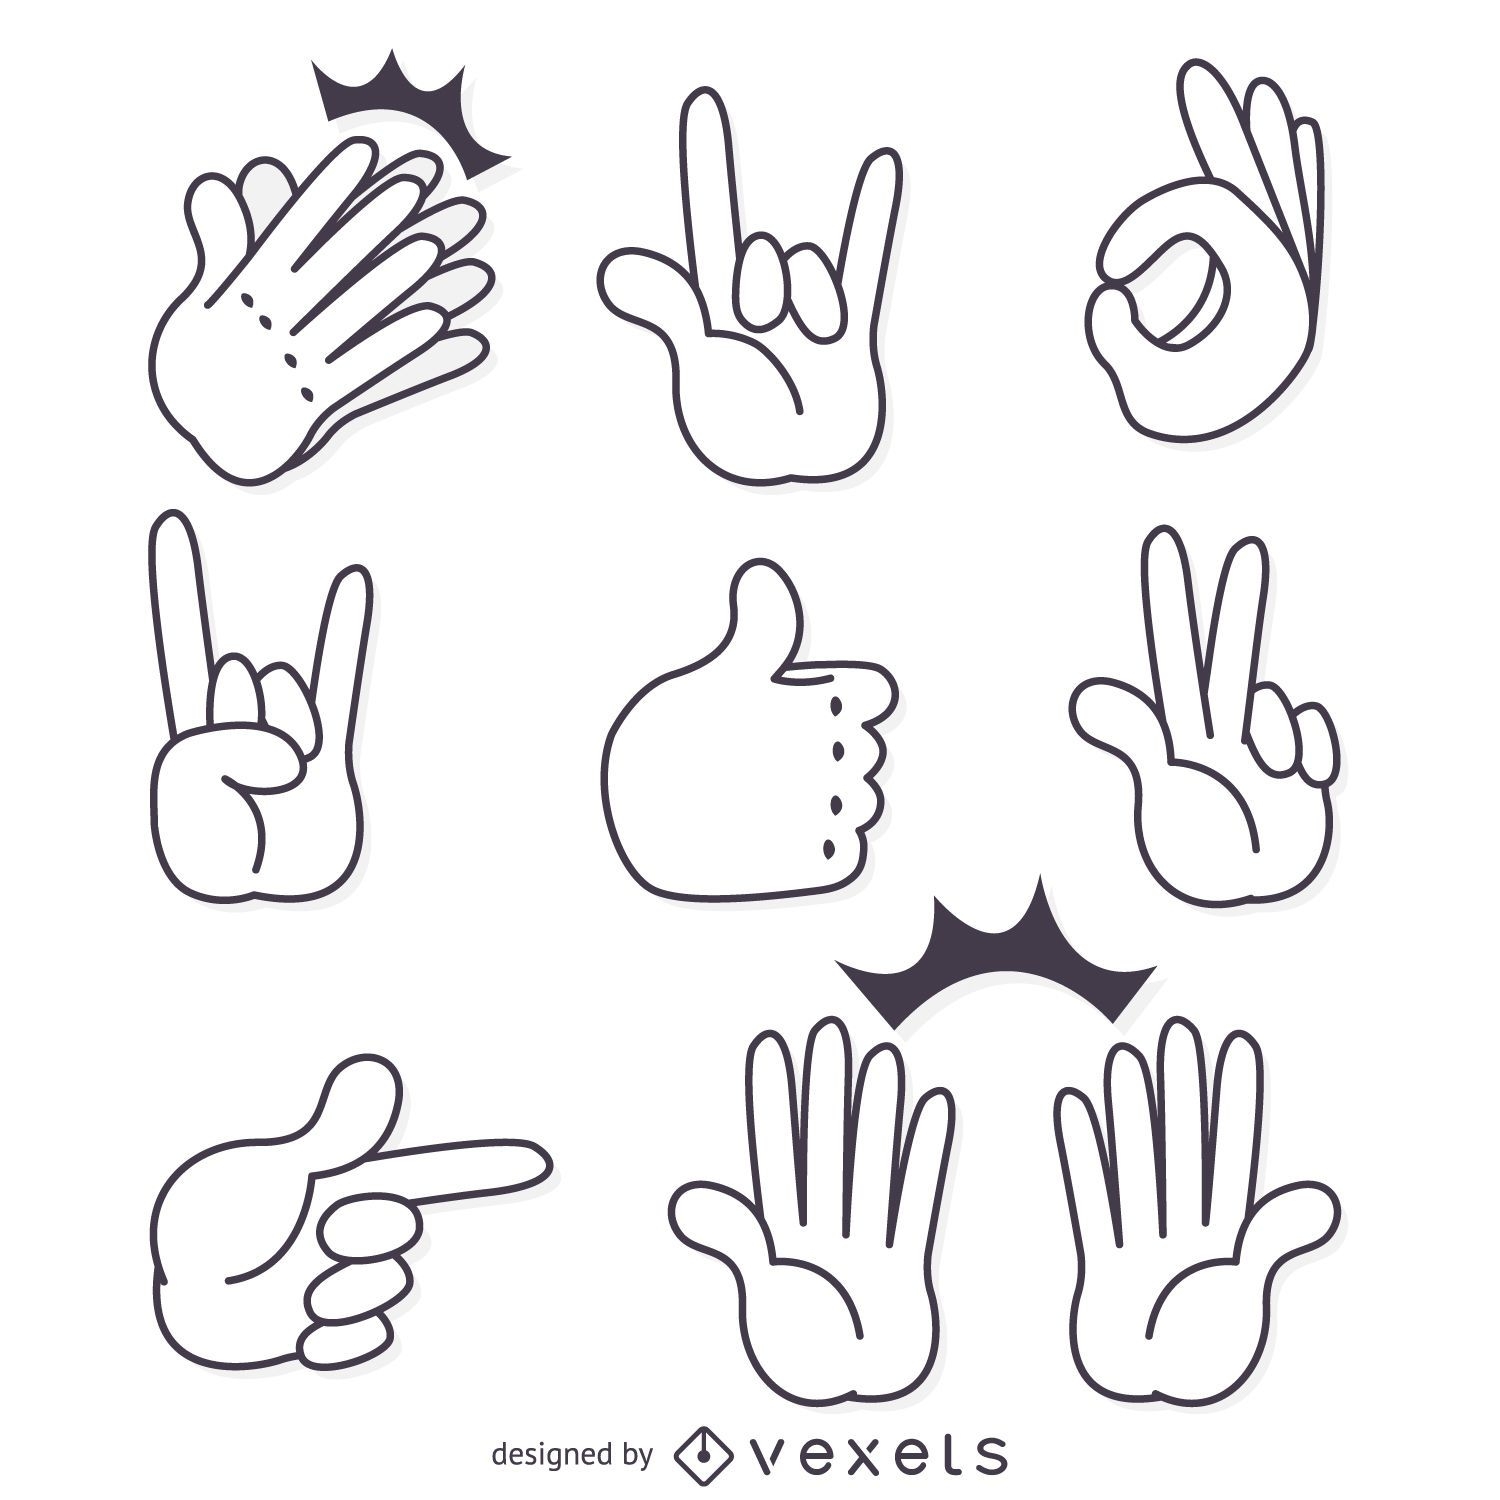 Hand signs gestures isolated illustrations